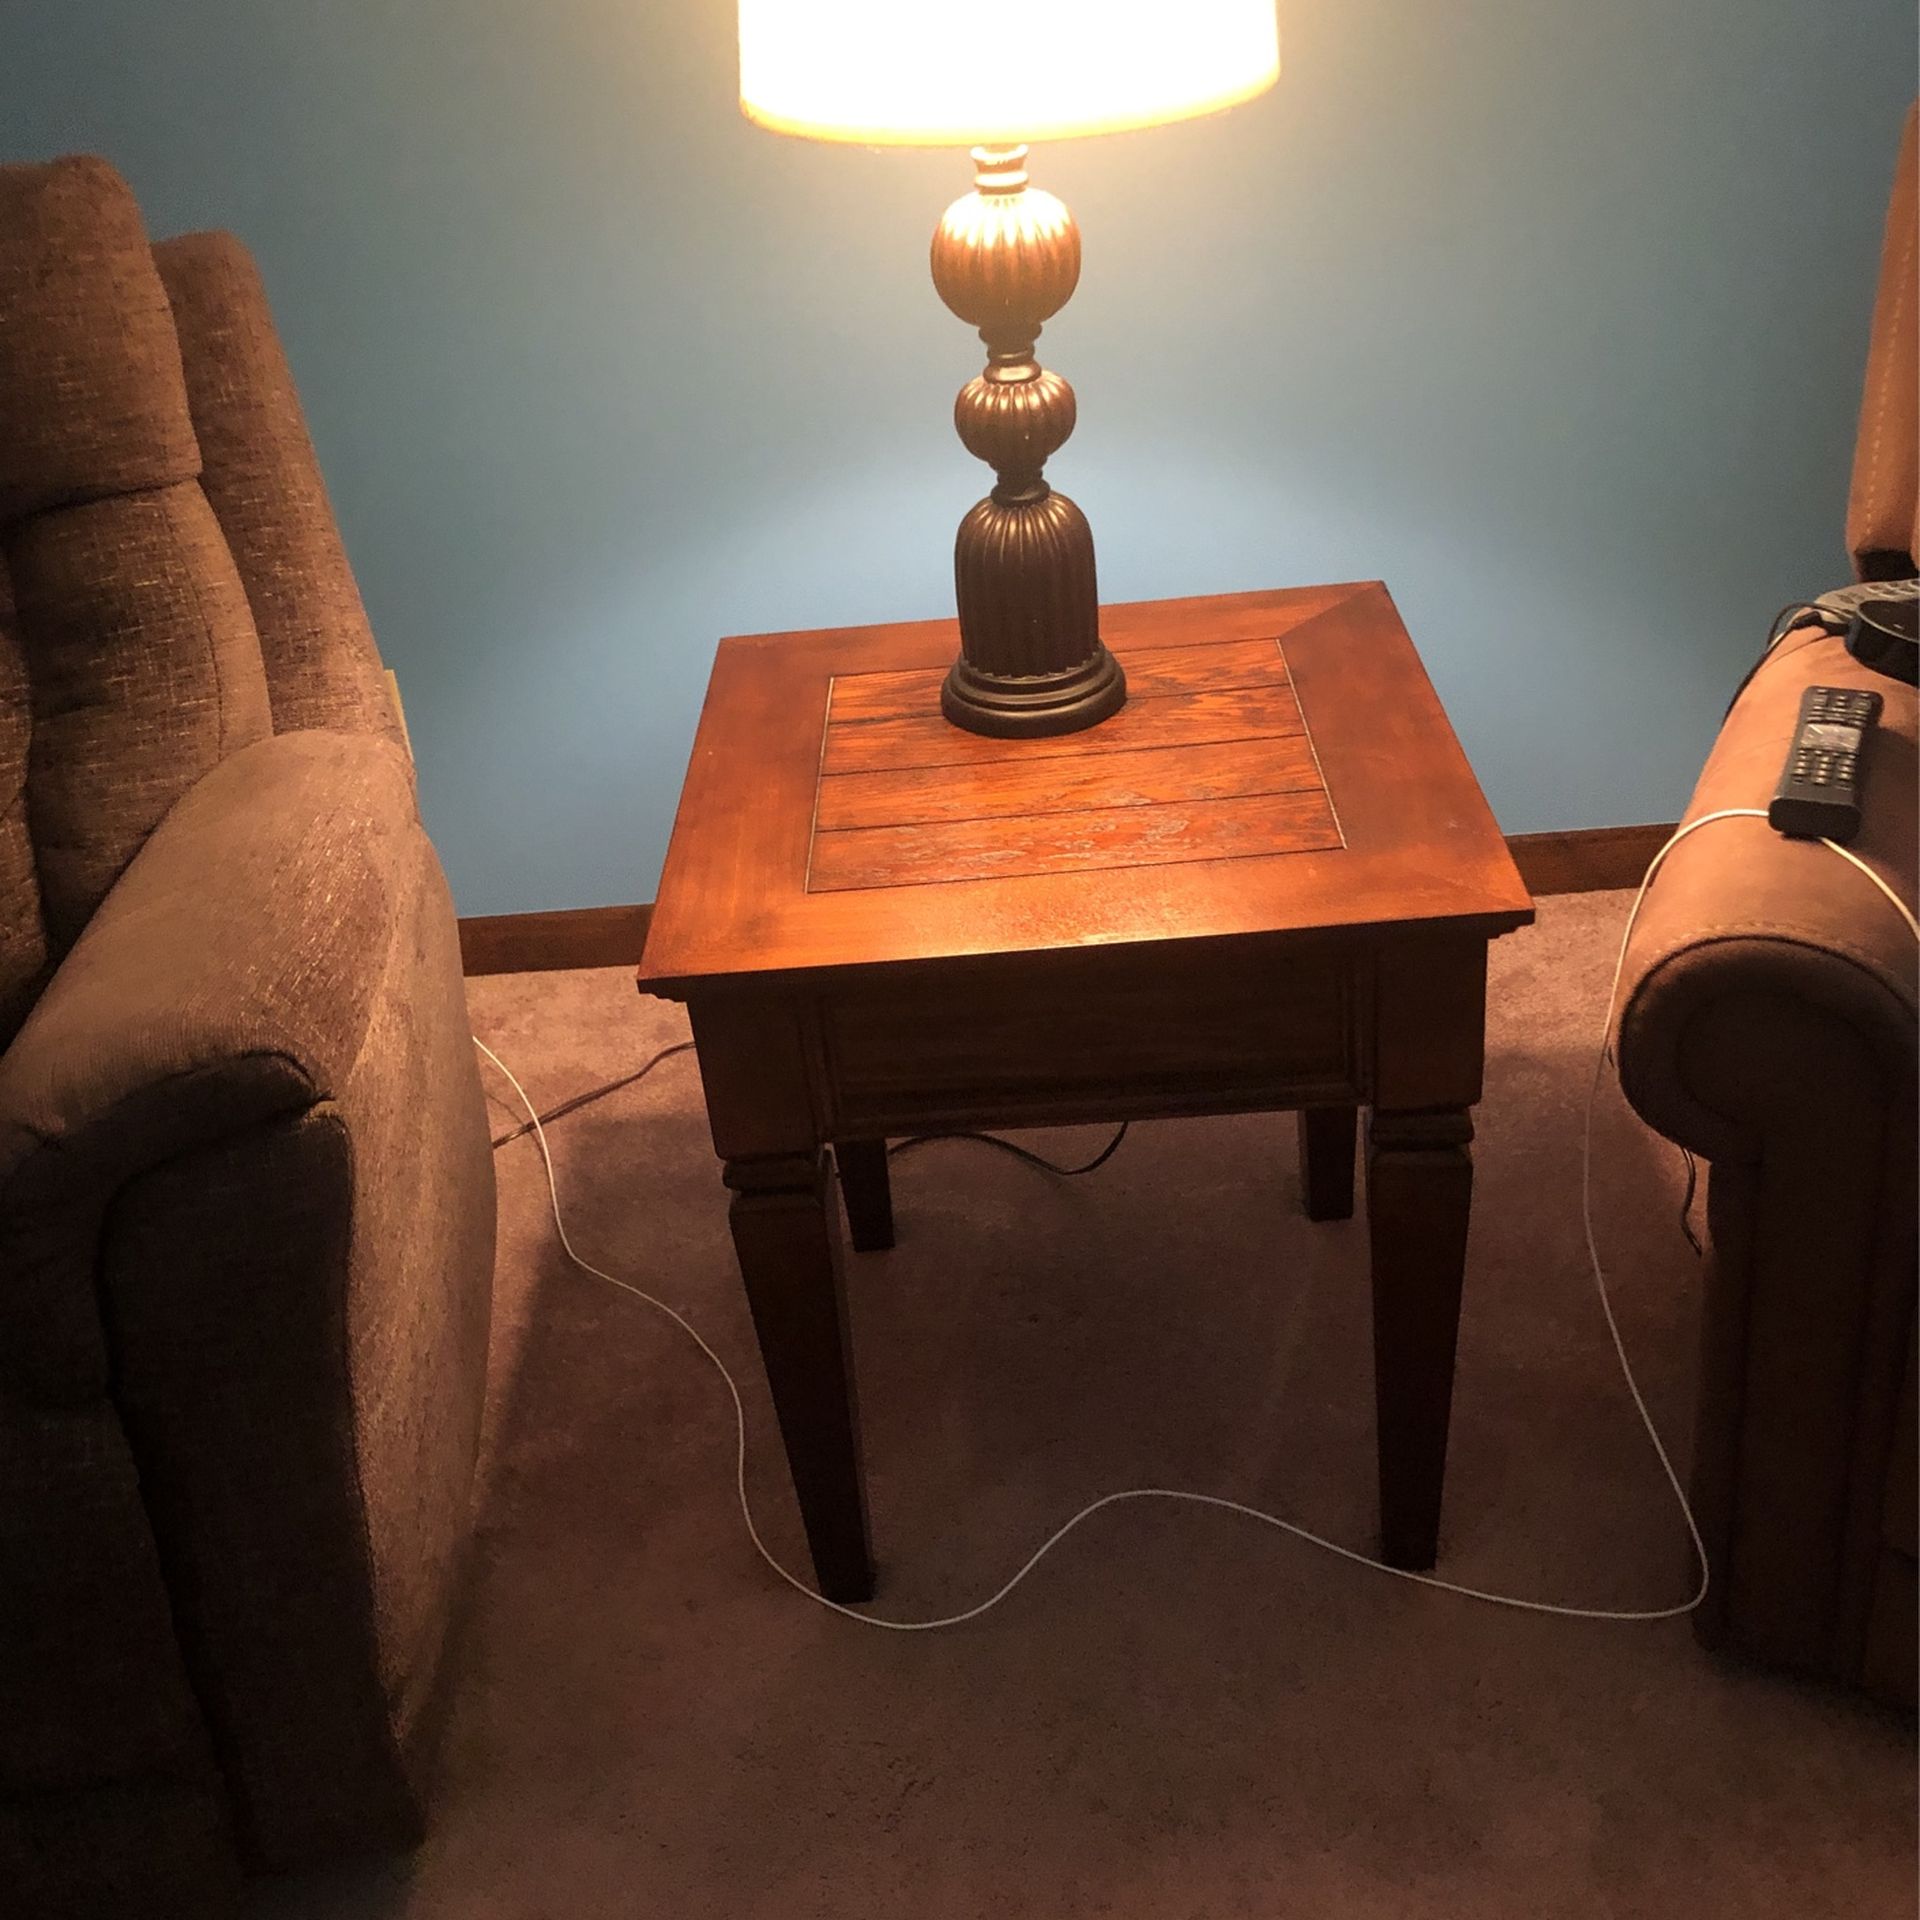 2 End Tables+ Lamp